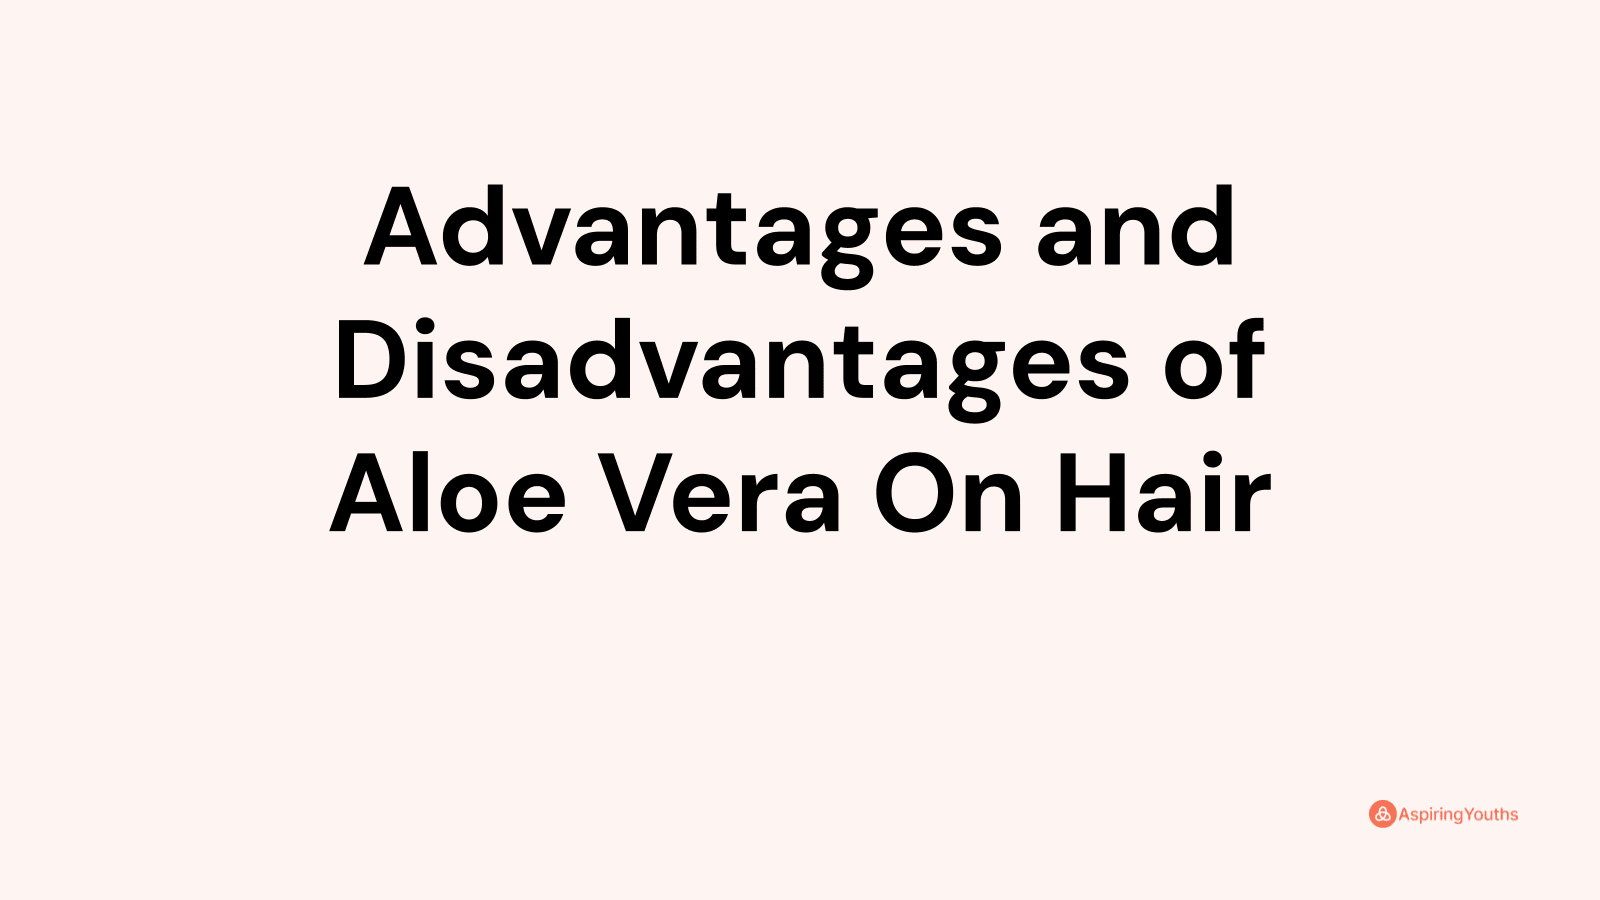 Advantages and disadvantages of Aloe Vera On Hair